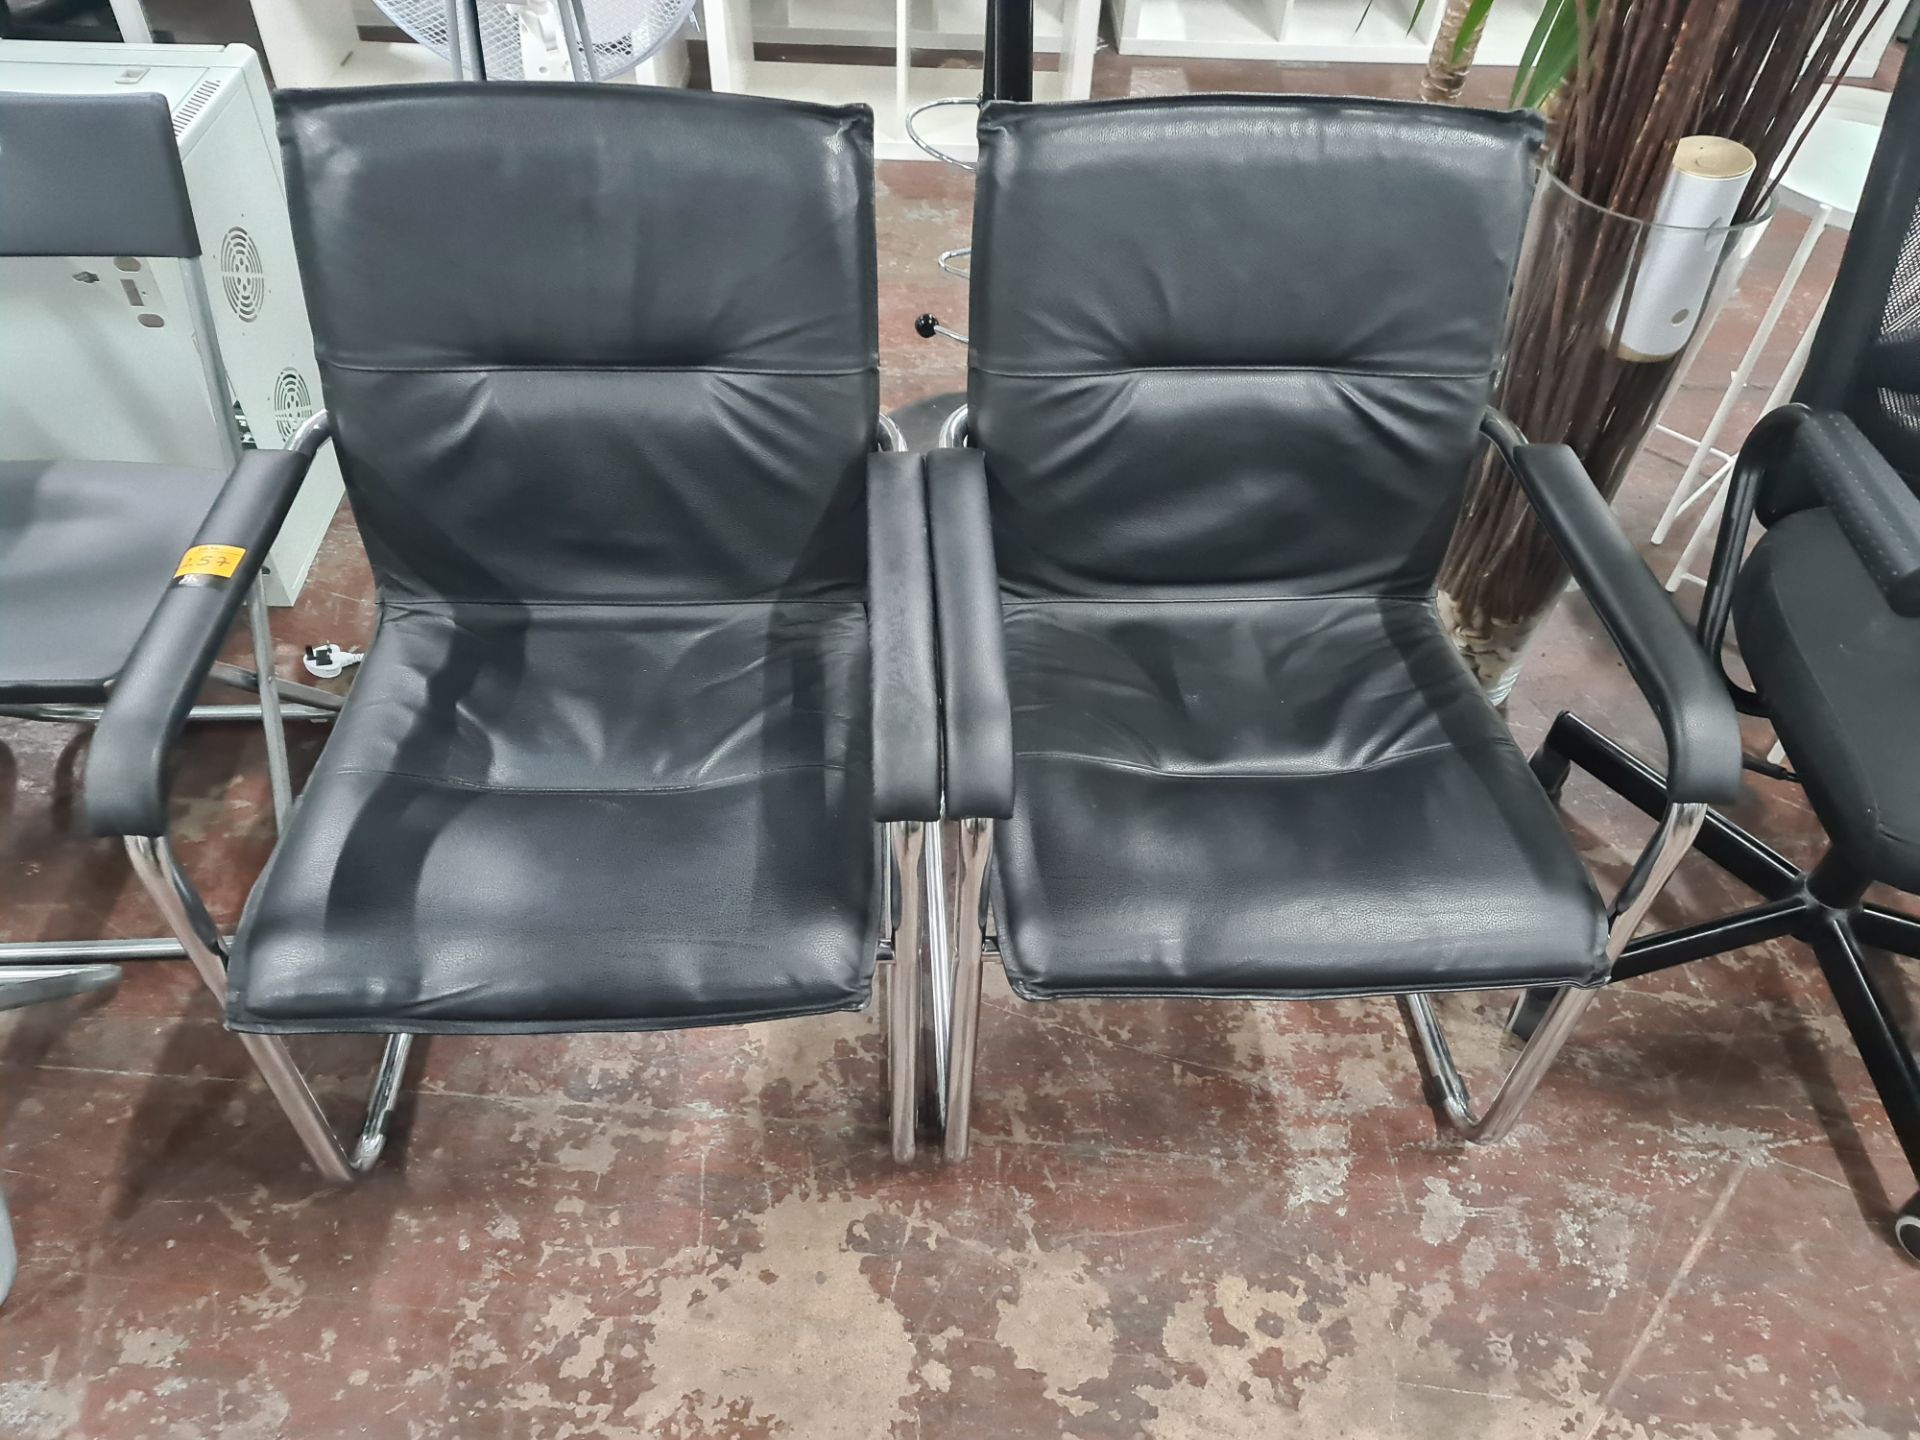 Pair of matching black leather/leather look upholstered chairs on chrome cantilever bases